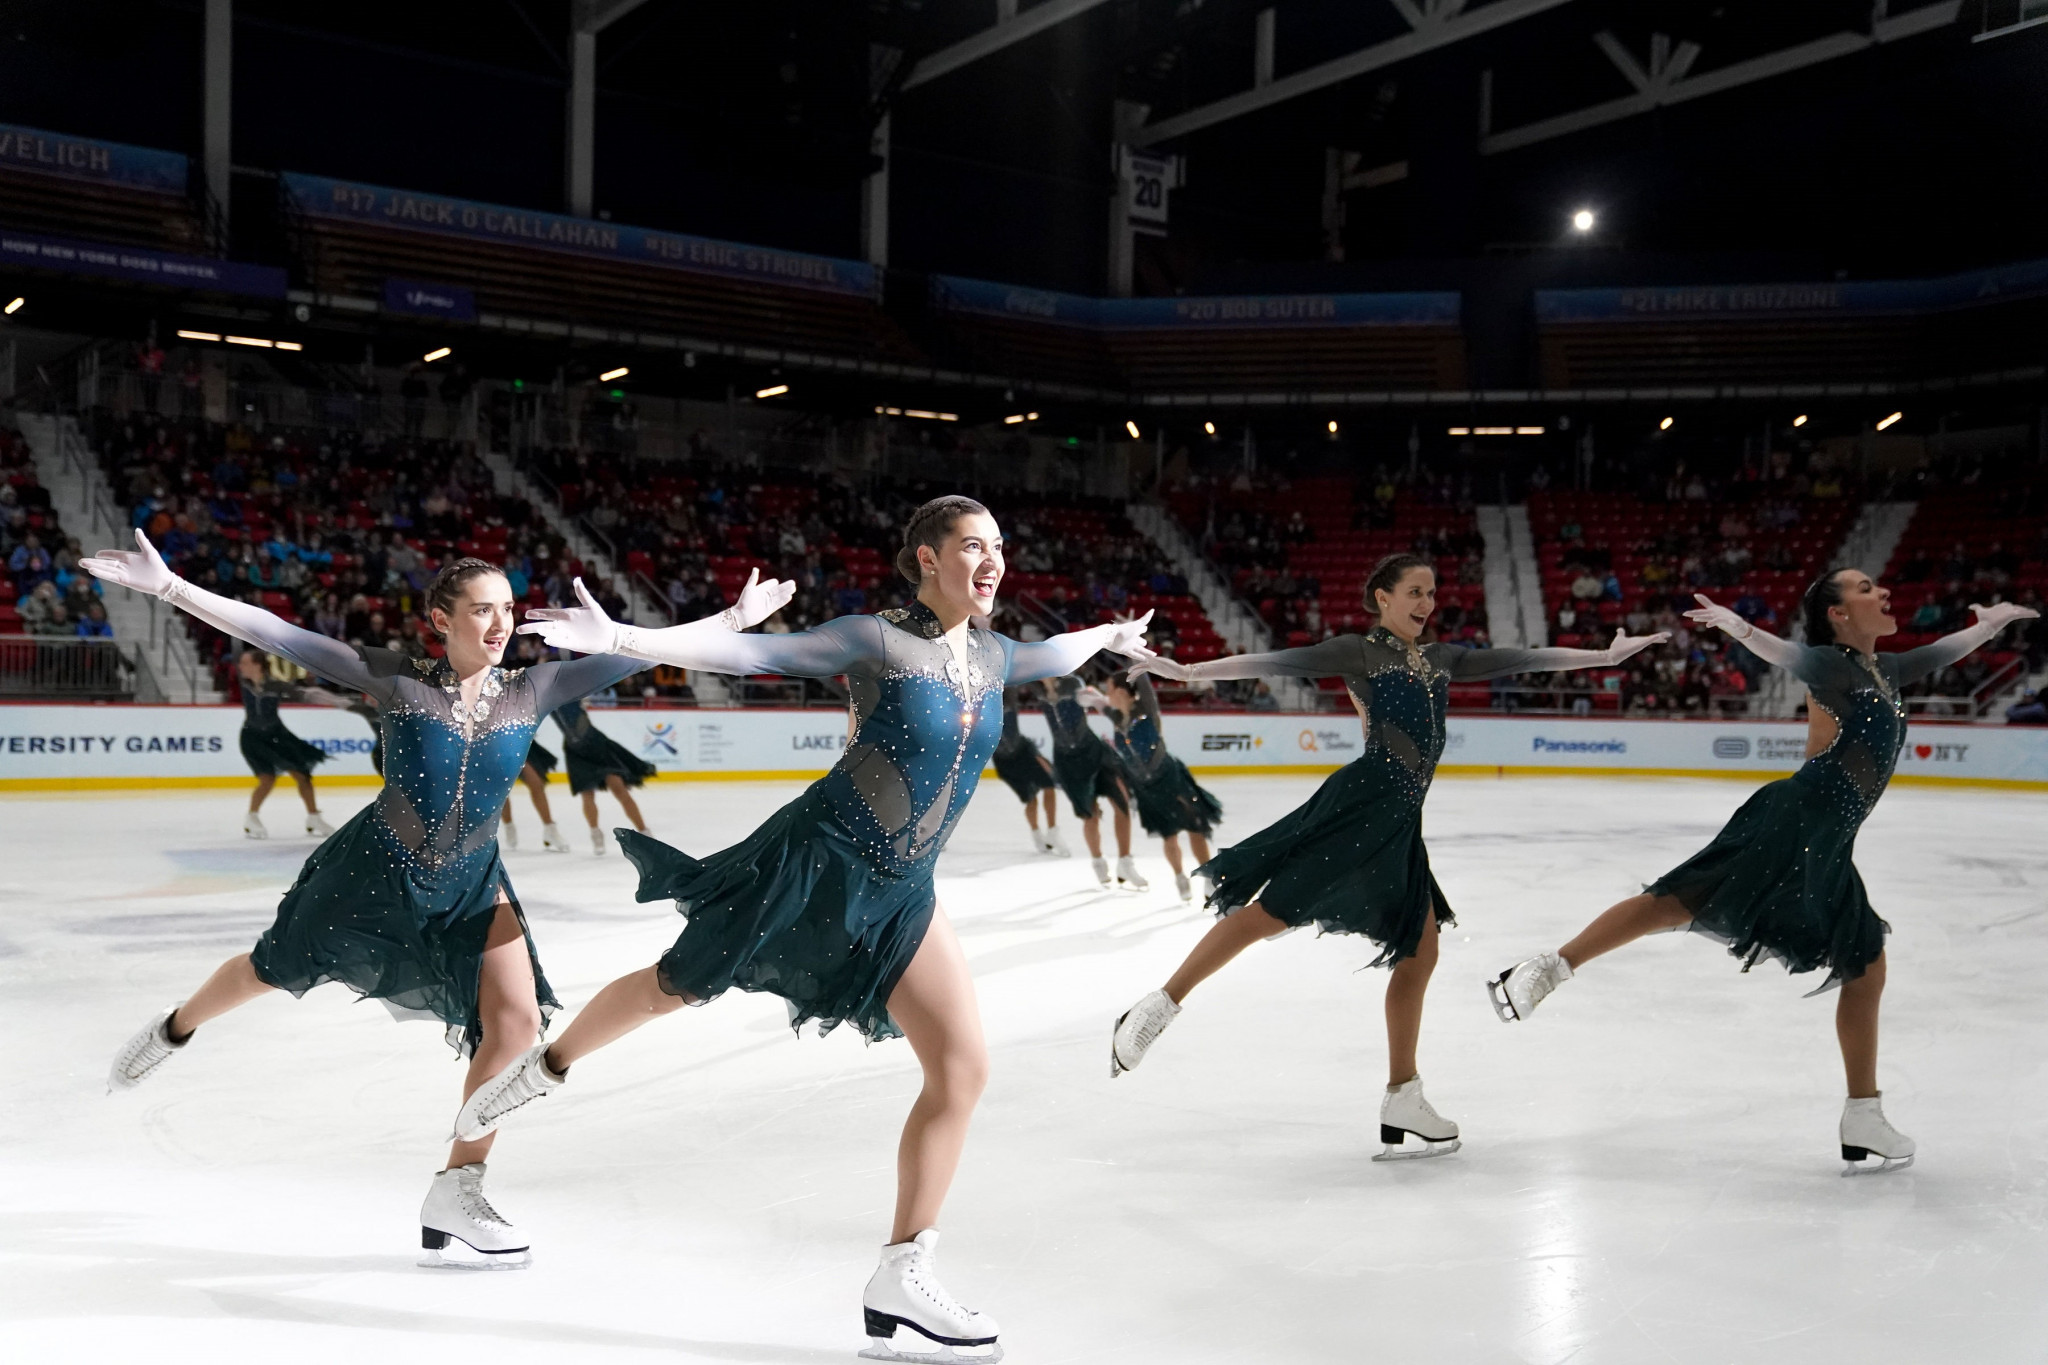 A gala was held at the Olympic Center following the completion of yesterday's figure skating competitions ©FISU